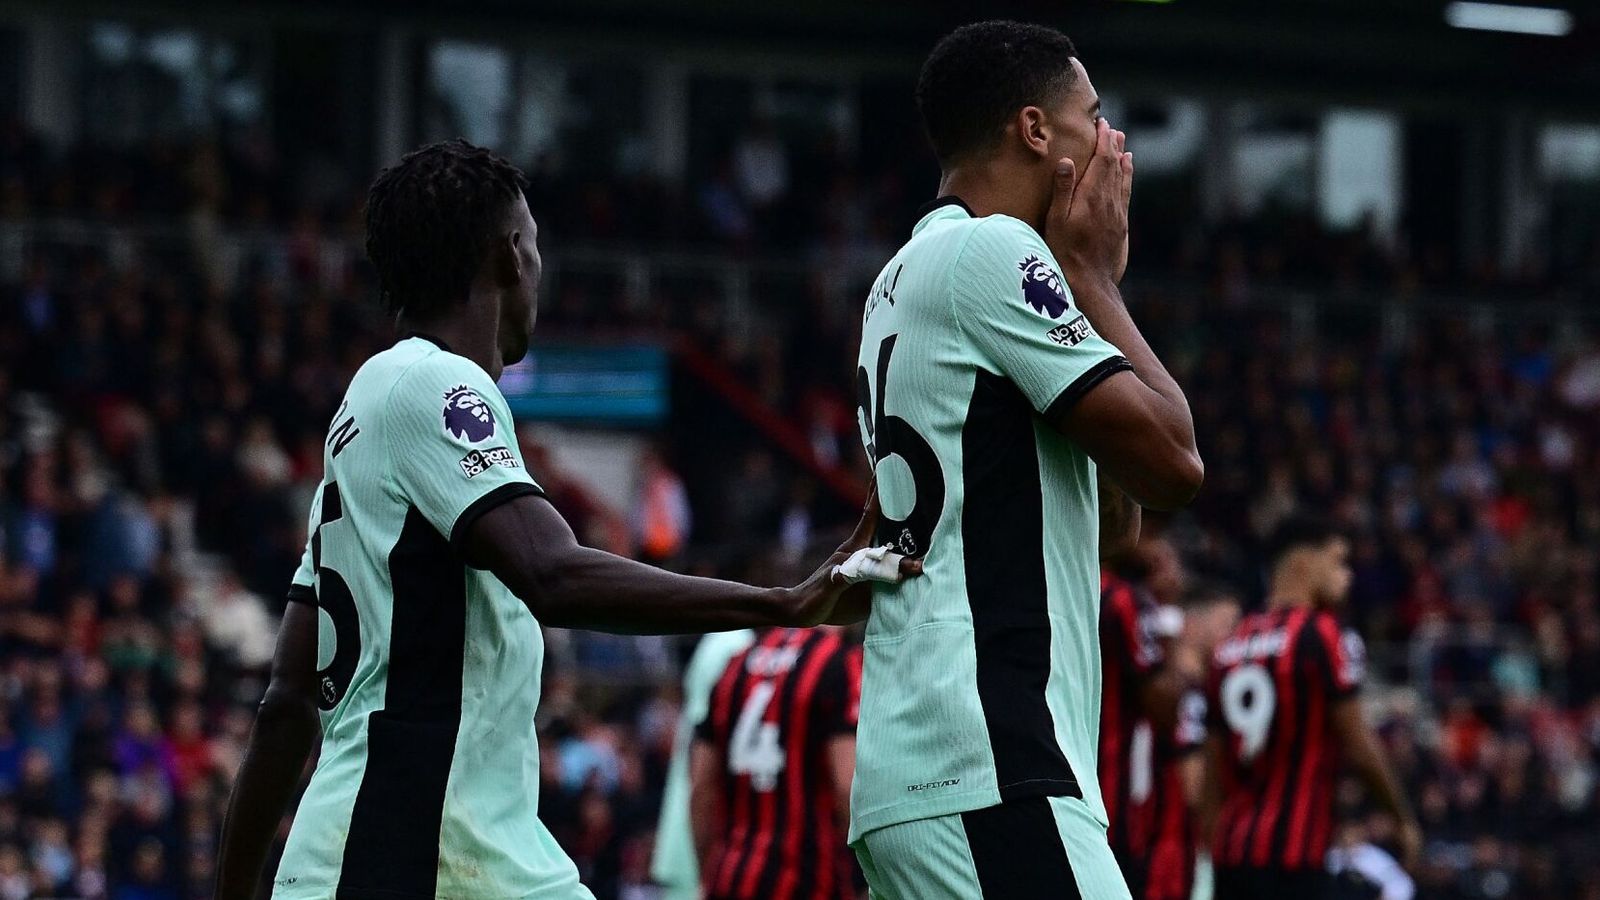 Chelsea misfire again in Bournemouth stalemate